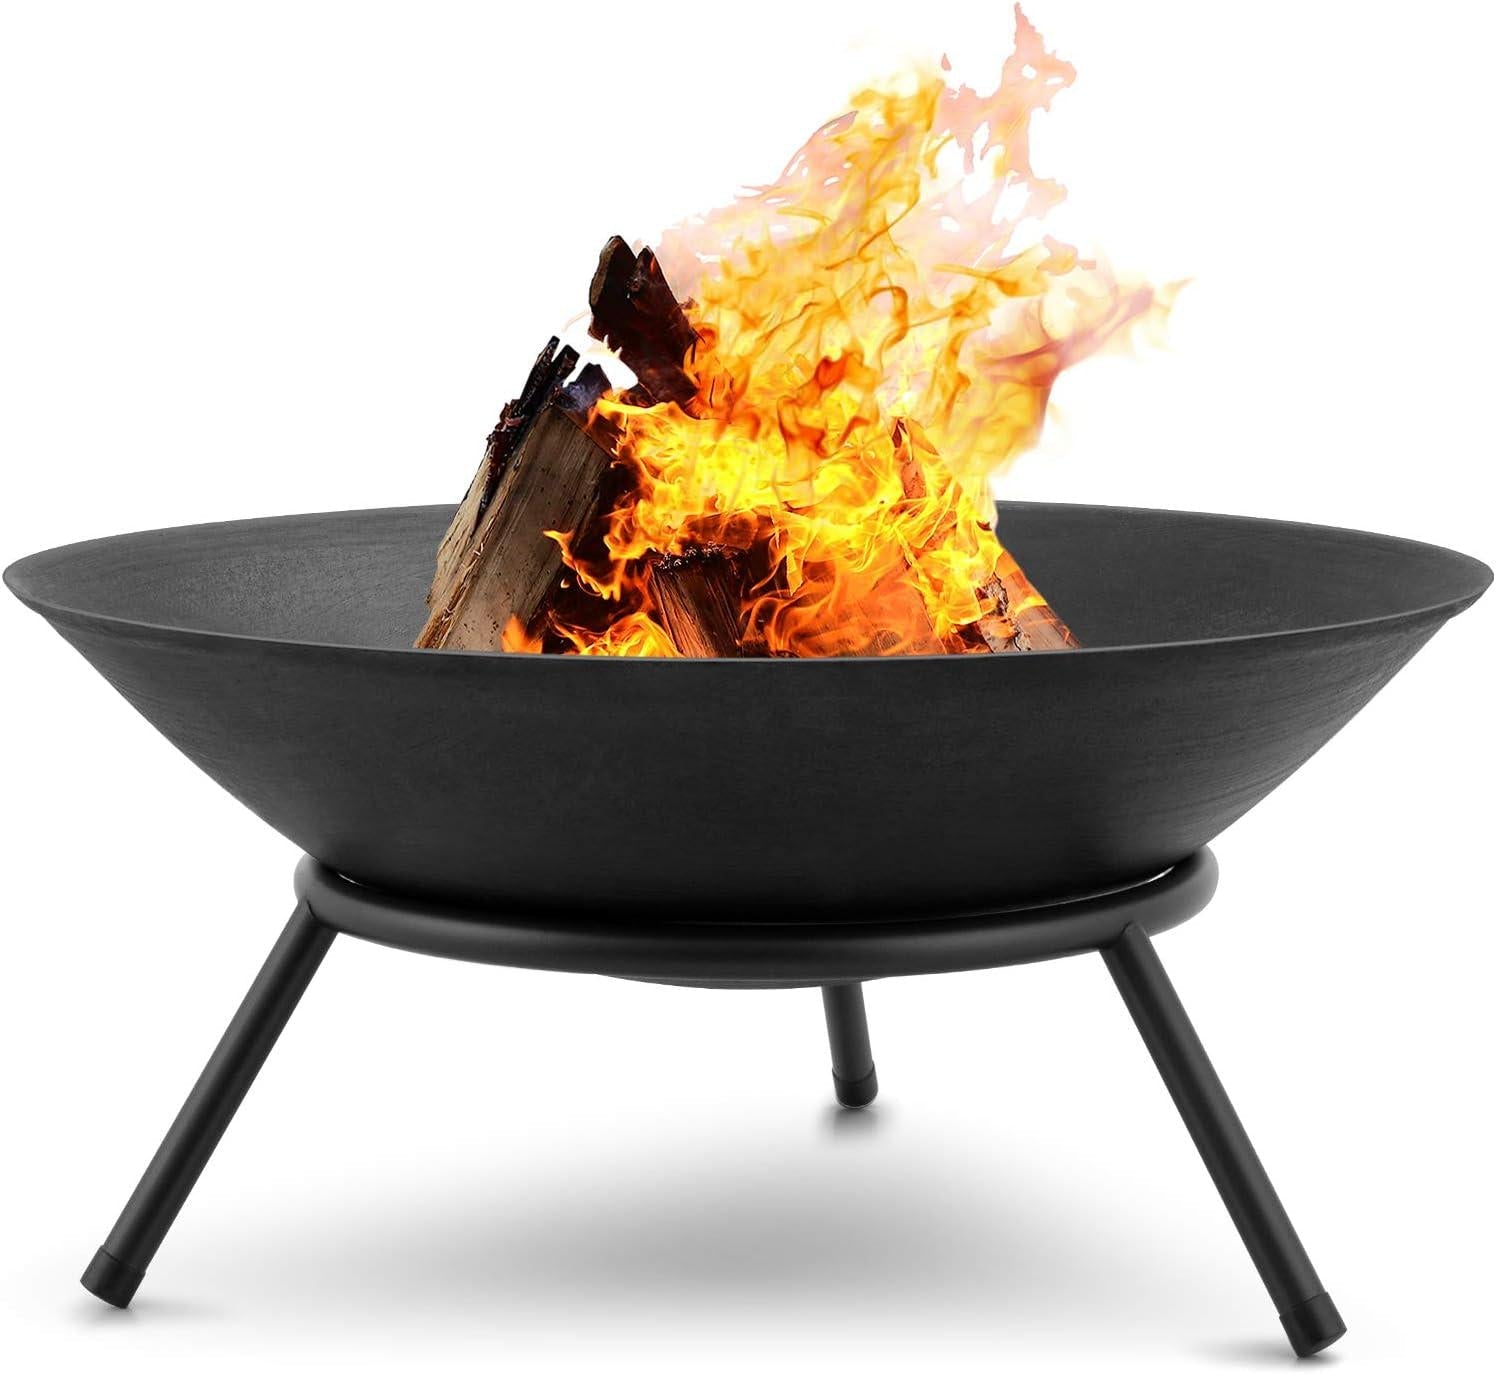 Amagabeli Fire Pit Outdoor Wood Burning 22.6in Firepit Firebowl Fireplace Heater Log Charcoal Burner Extra Deep Large Round Camping Outside Patio Backyard Deck Heavy Duty Metal Grate ET288-